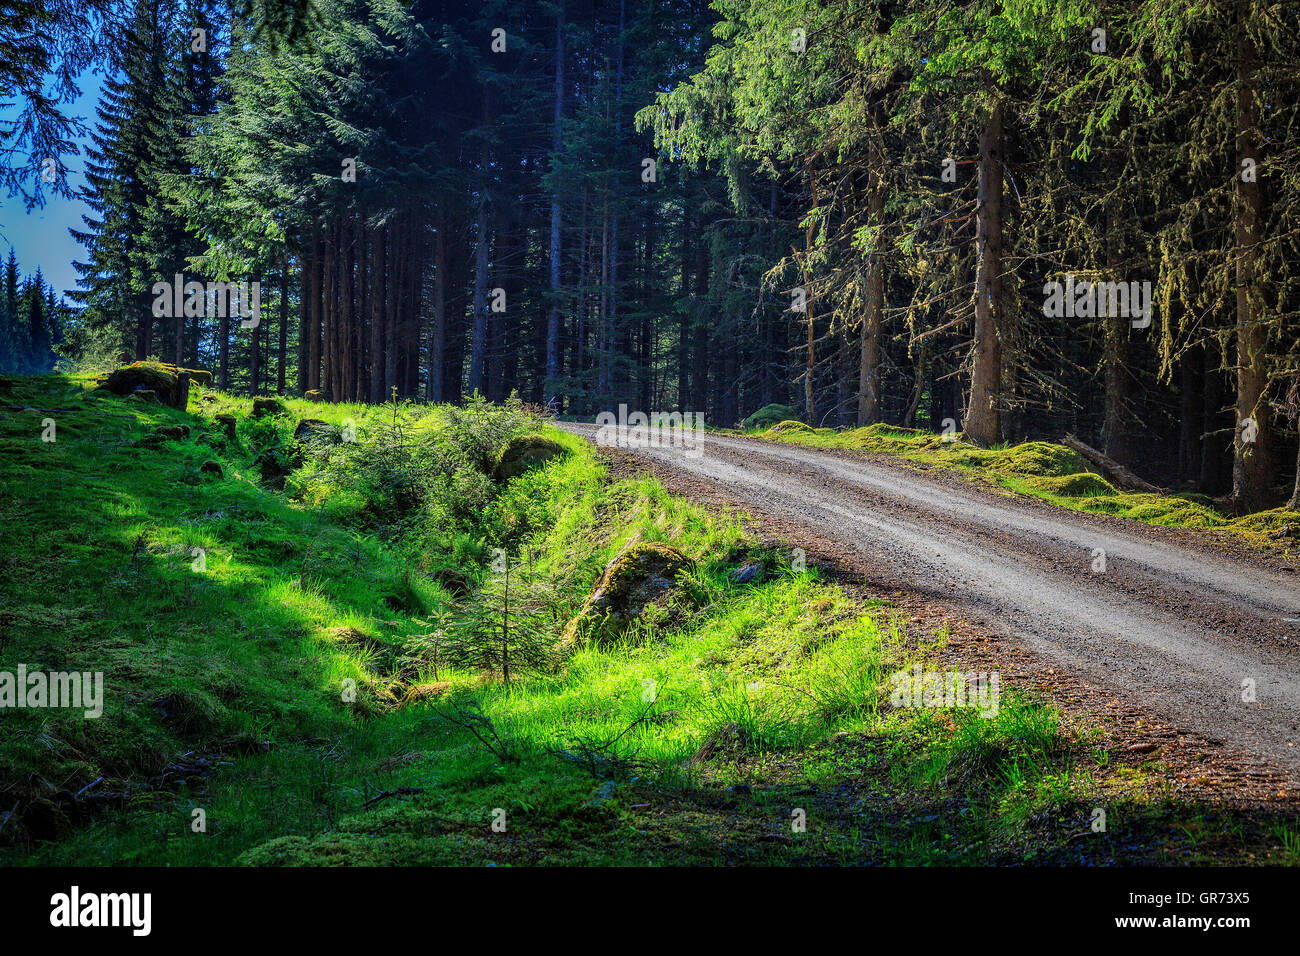 A dirt road through the hills in Norway. Stock Photo